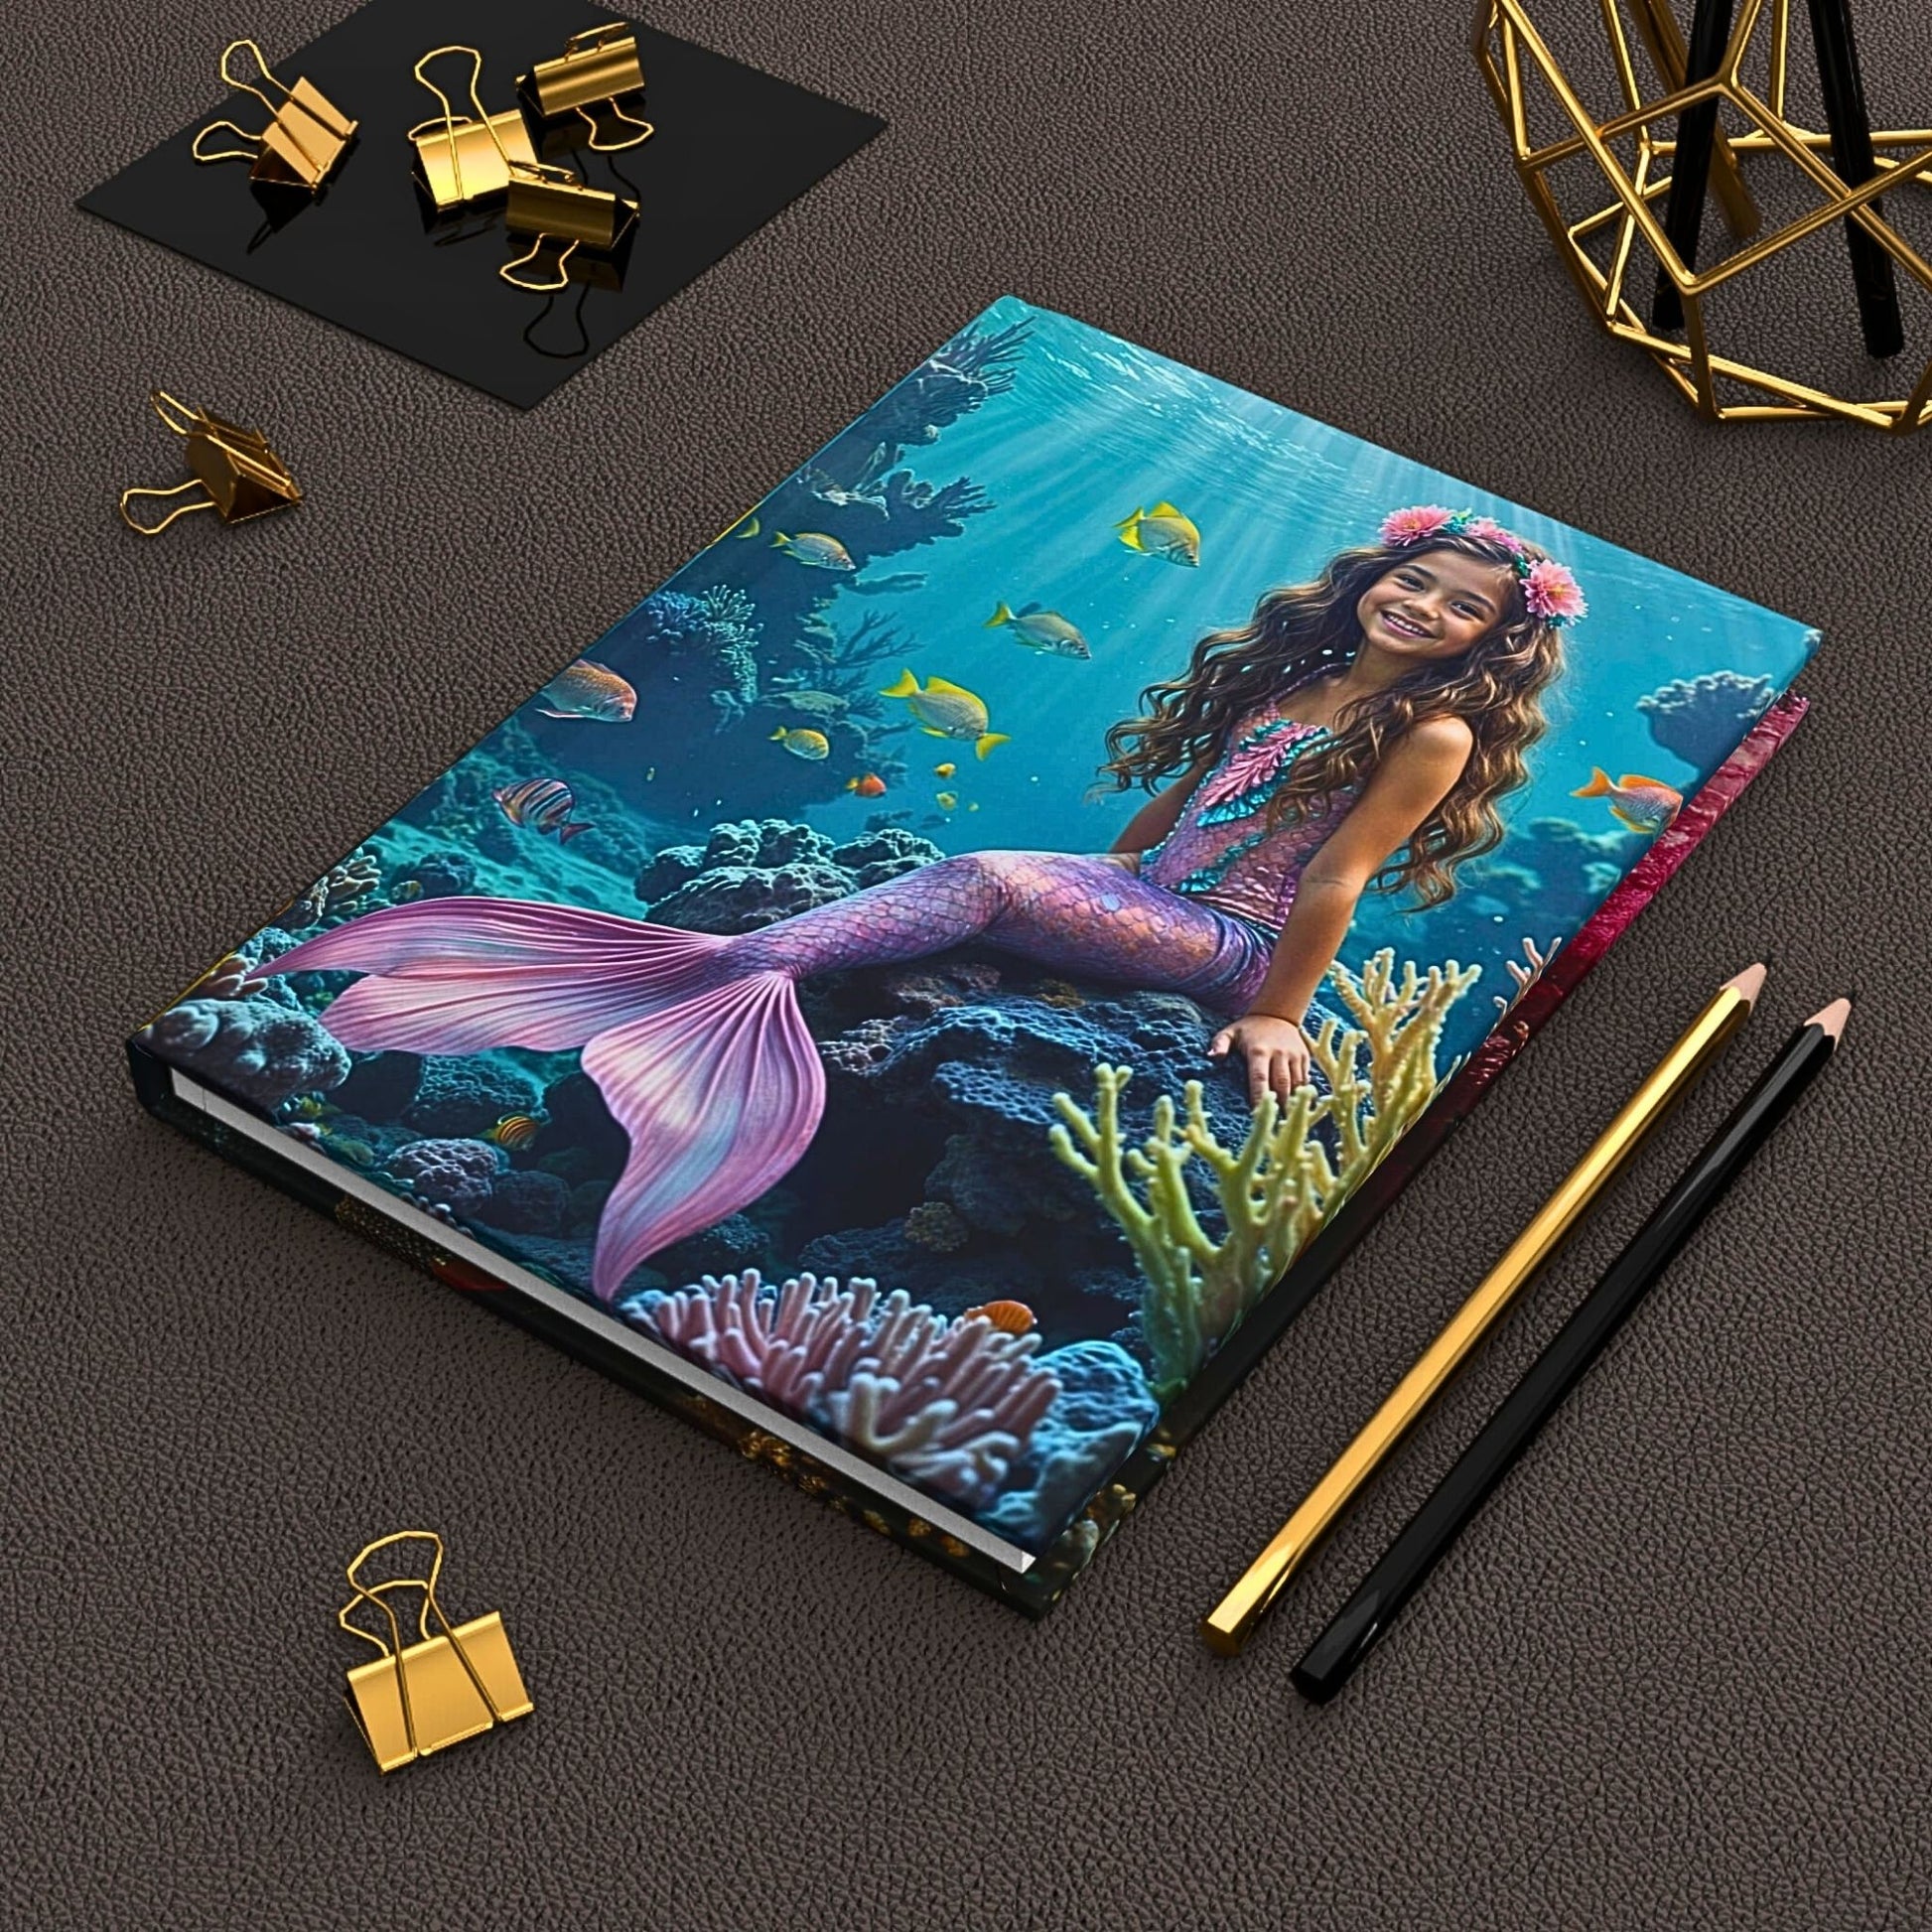 Transform her imagination with our Custom Mermaid Journal, crafted from her cherished photo. This personalized gift for girls is a whimsical choice for birthdays, capturing underwater adventures and inspiring creativity in a stylish format.